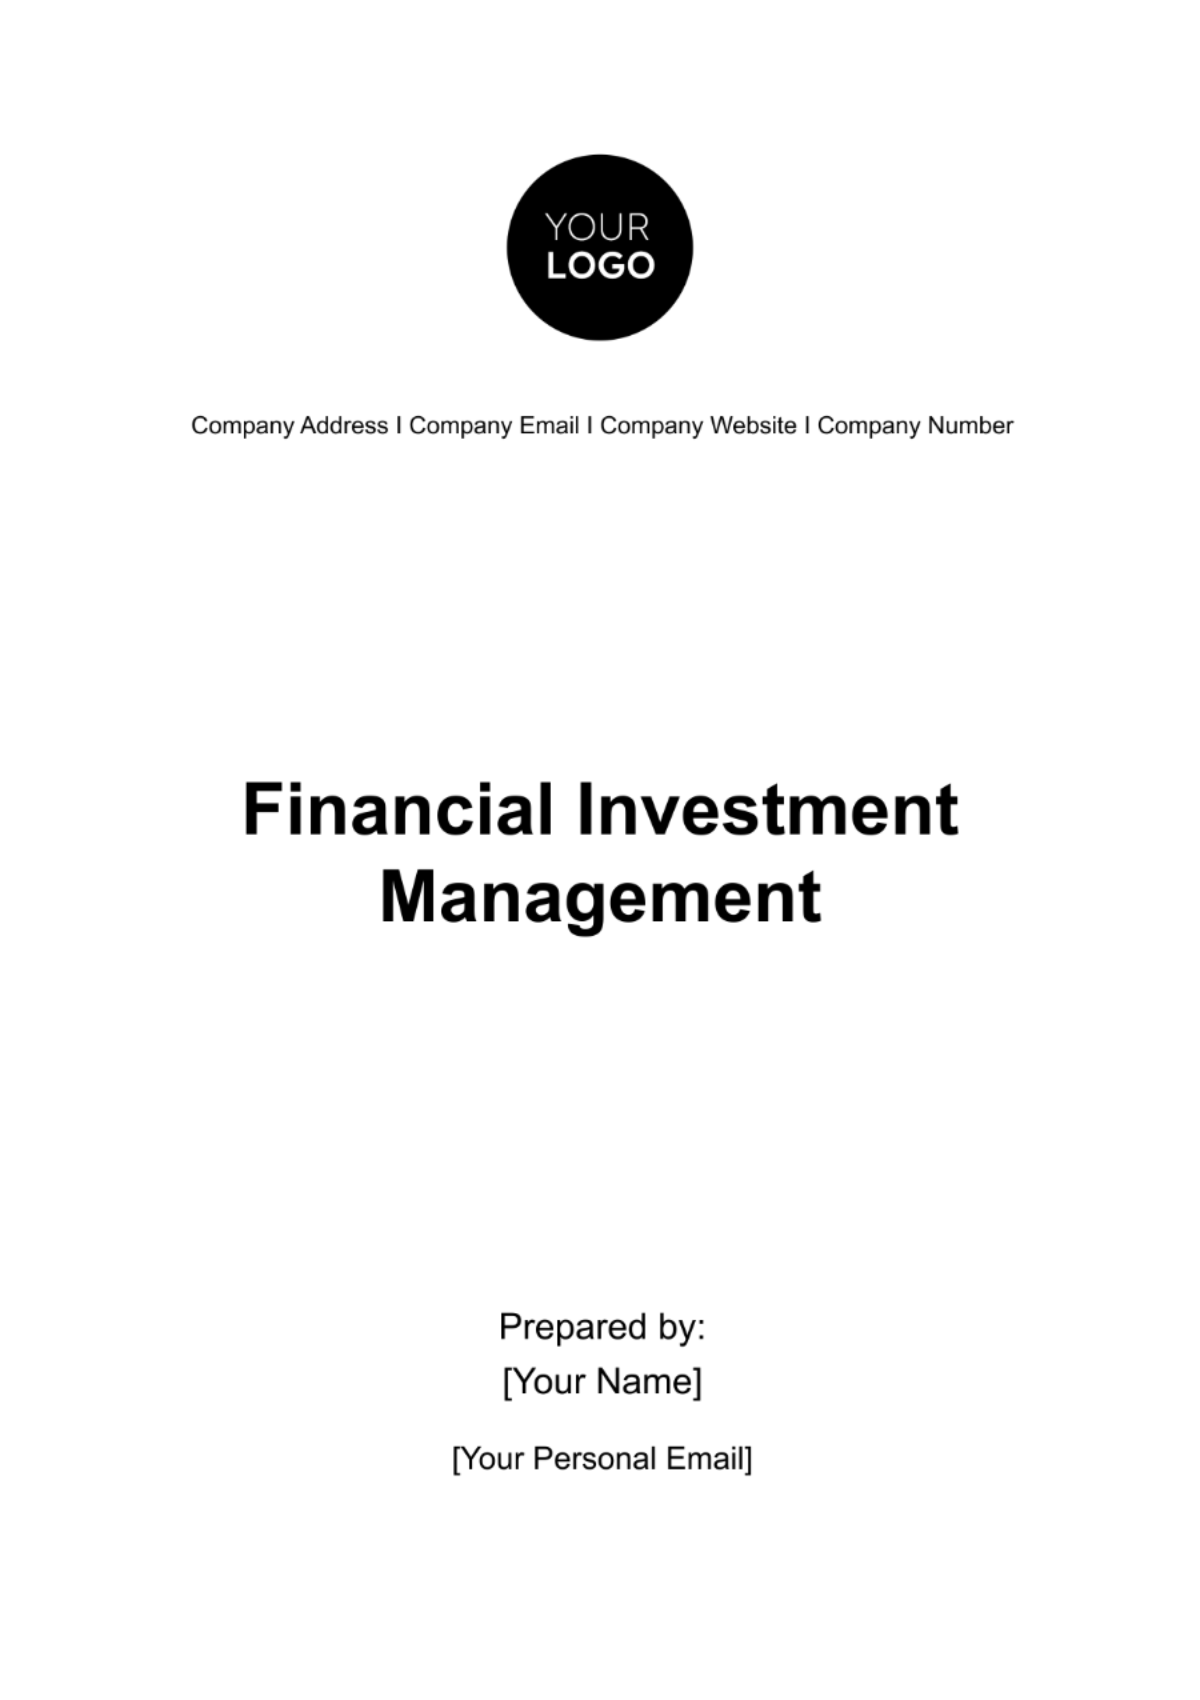 Financial Investment Management Template